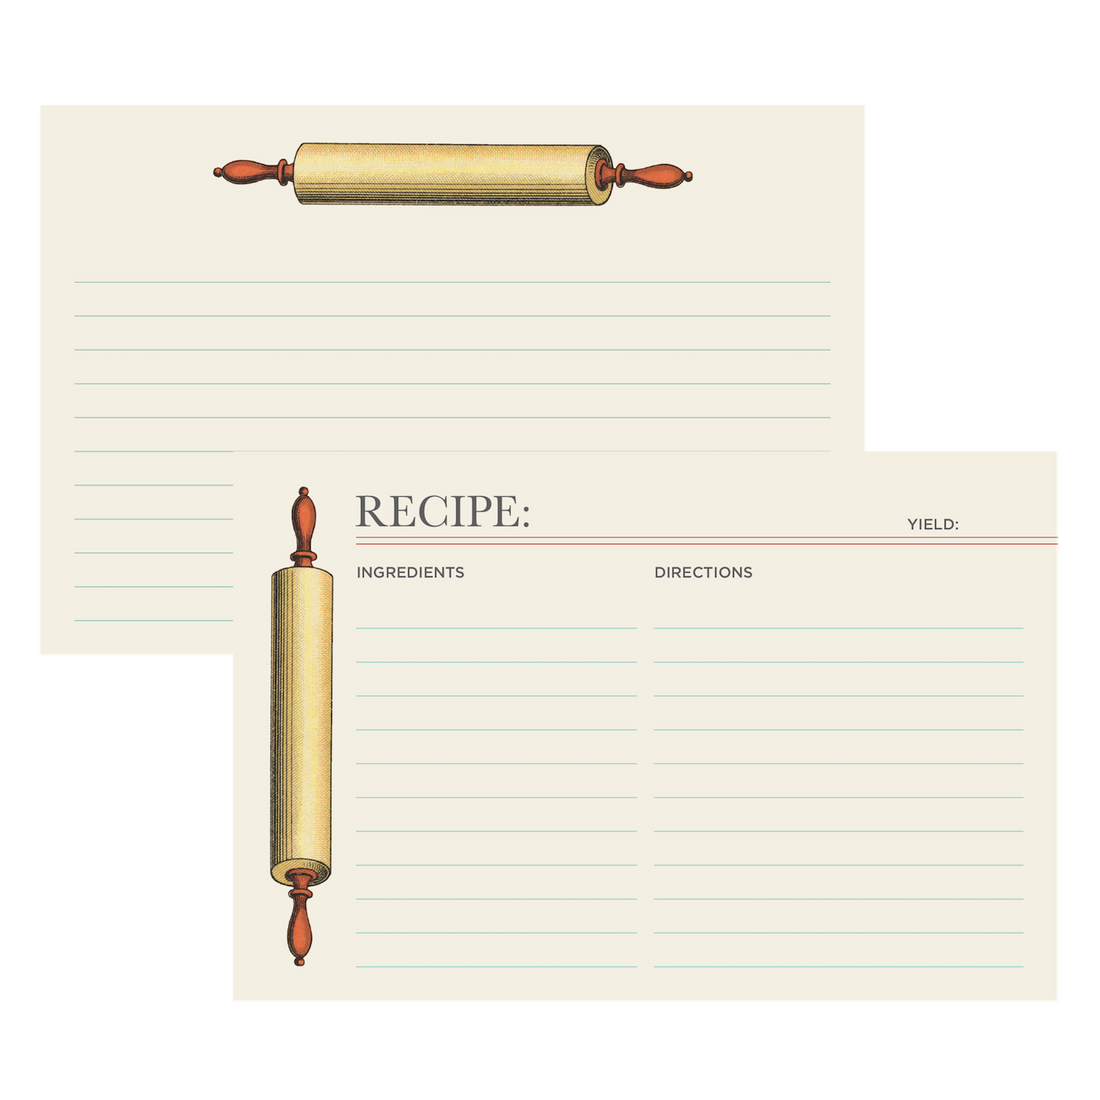 Both sides of a lined recipe card with space for ingredients and directions on the front, with more lined space on the back. The front of the card is adorned with an illustrated rolling pin along the left edge, and the back features an illustrated rolling pin along the top edge.